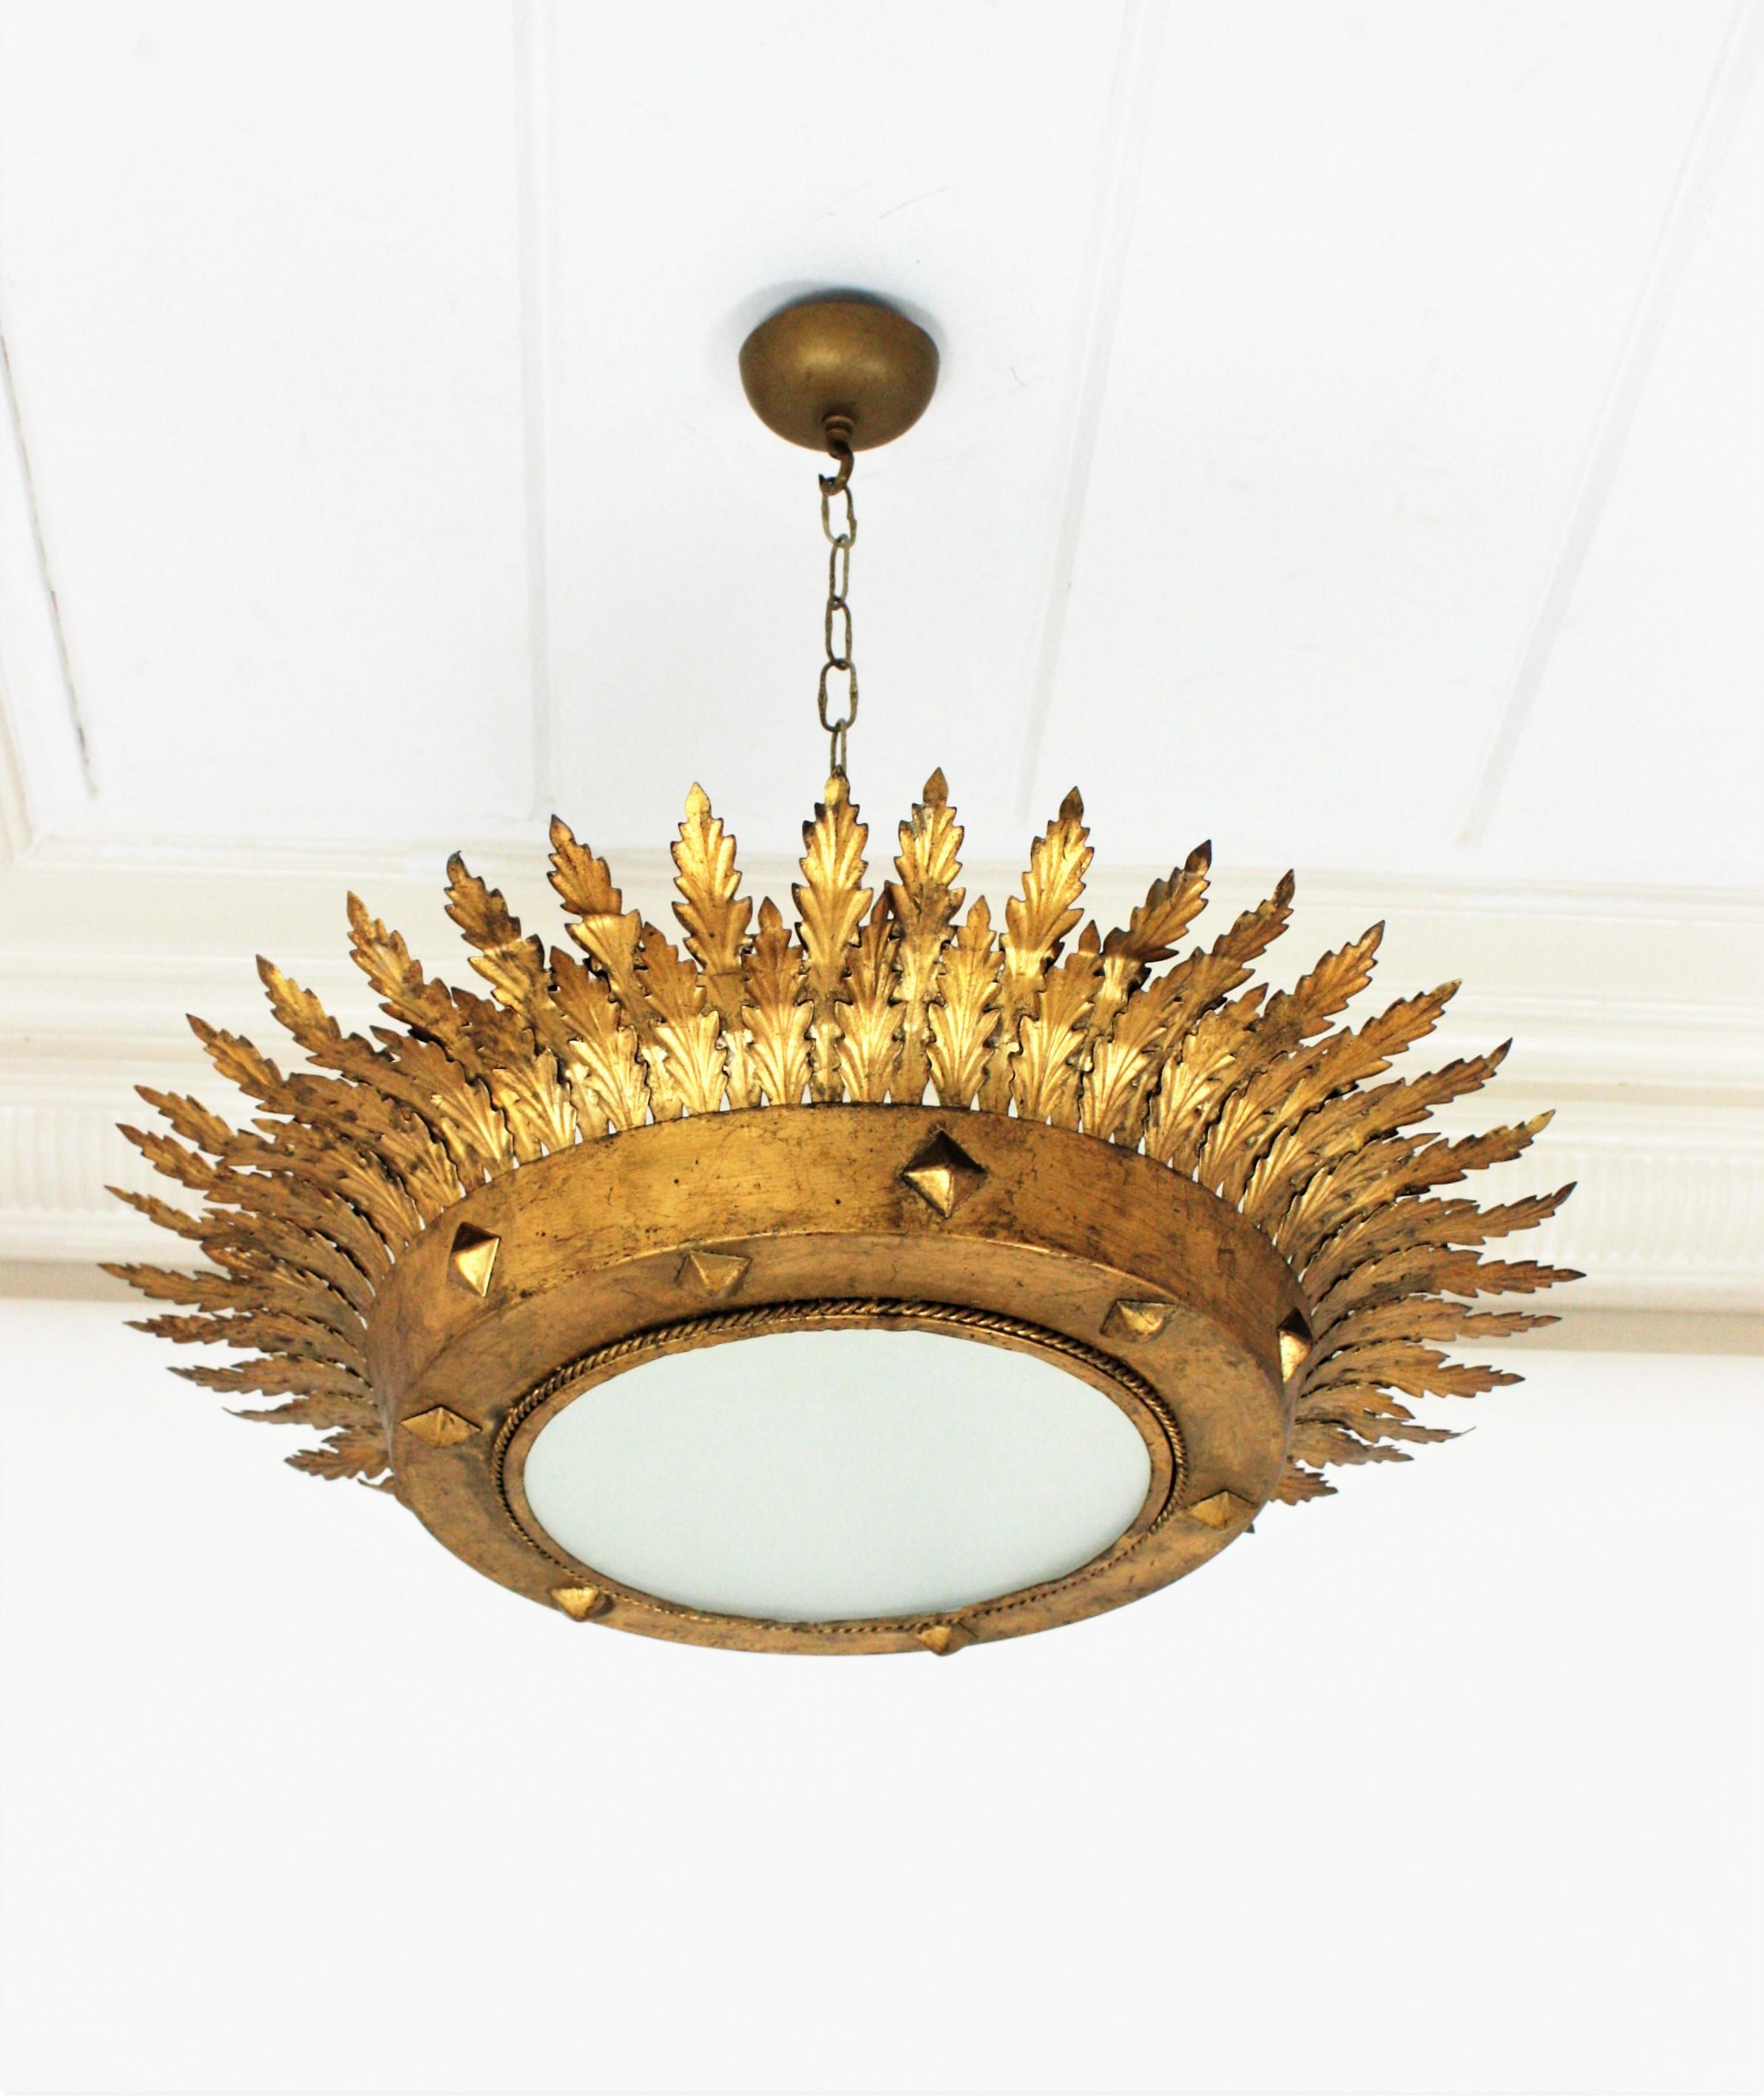 Dramatic large sunburst crown ceiling light fixture or chandelier / pendant with leafed frame and frosted glass diffuser. Spain, 1940s
This ceiling light was handcrafted in Spain and its design combines neoclassical and Hollywood Regency accents.